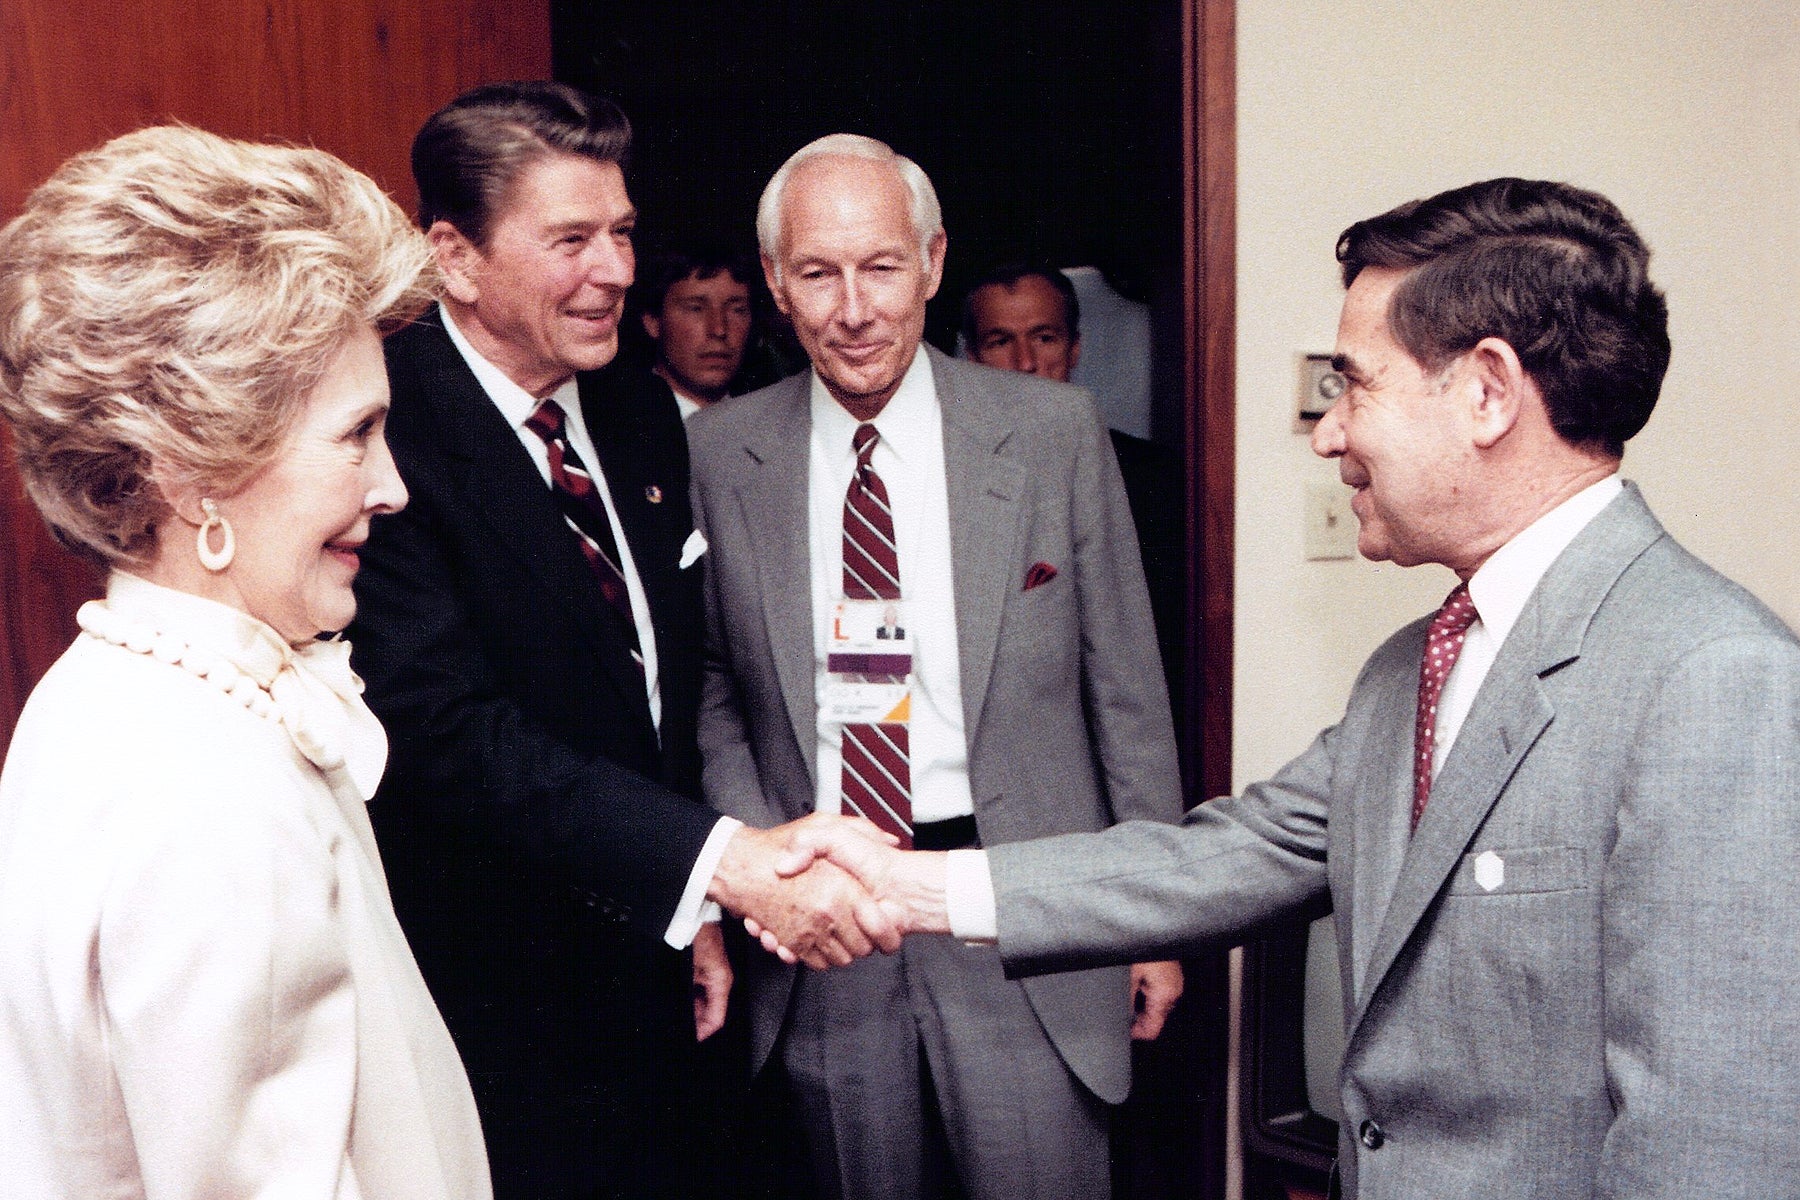 Ronald and Nancy Reagan with USC President James H. Zumberge and USC Vice President Anthony Lazzaro